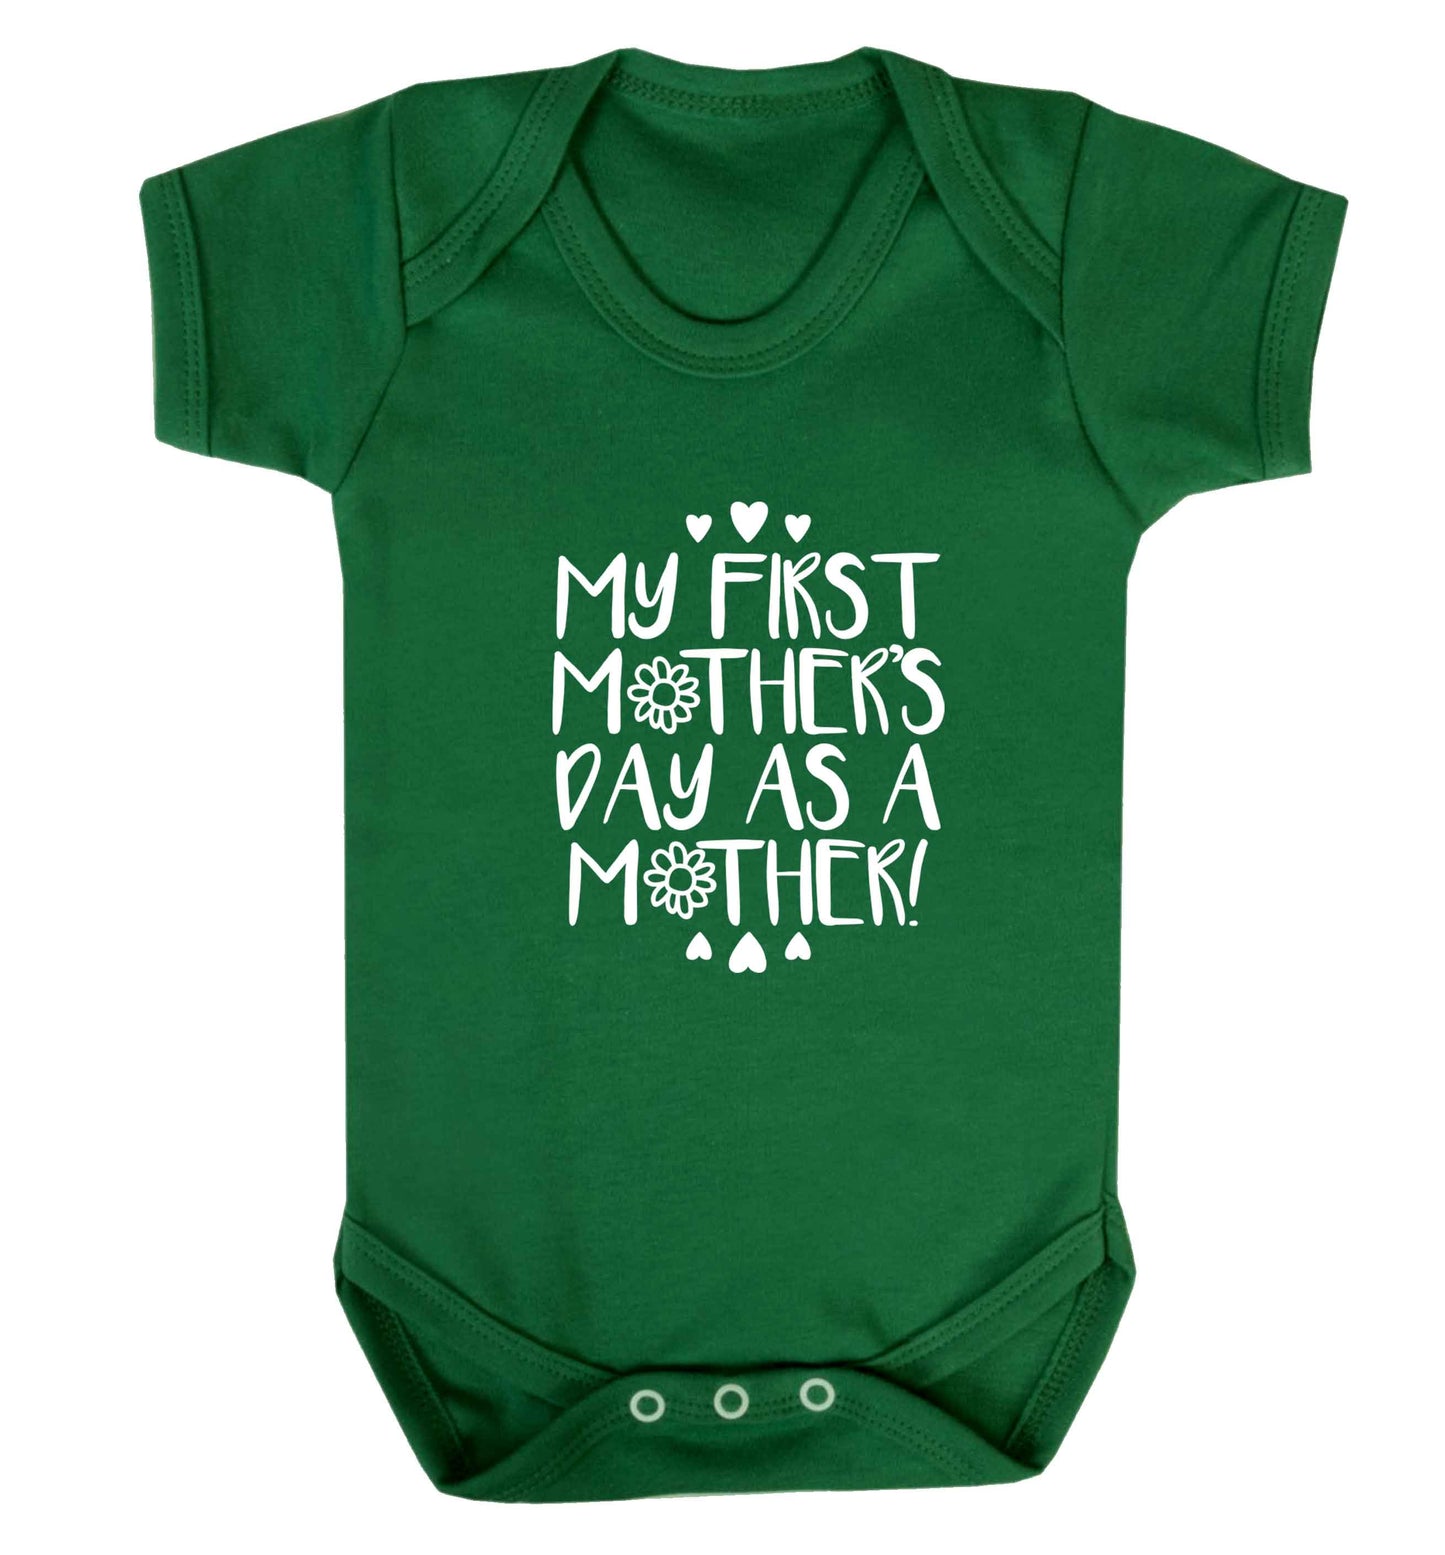 It's my first mother's day as a mother baby vest green 18-24 months